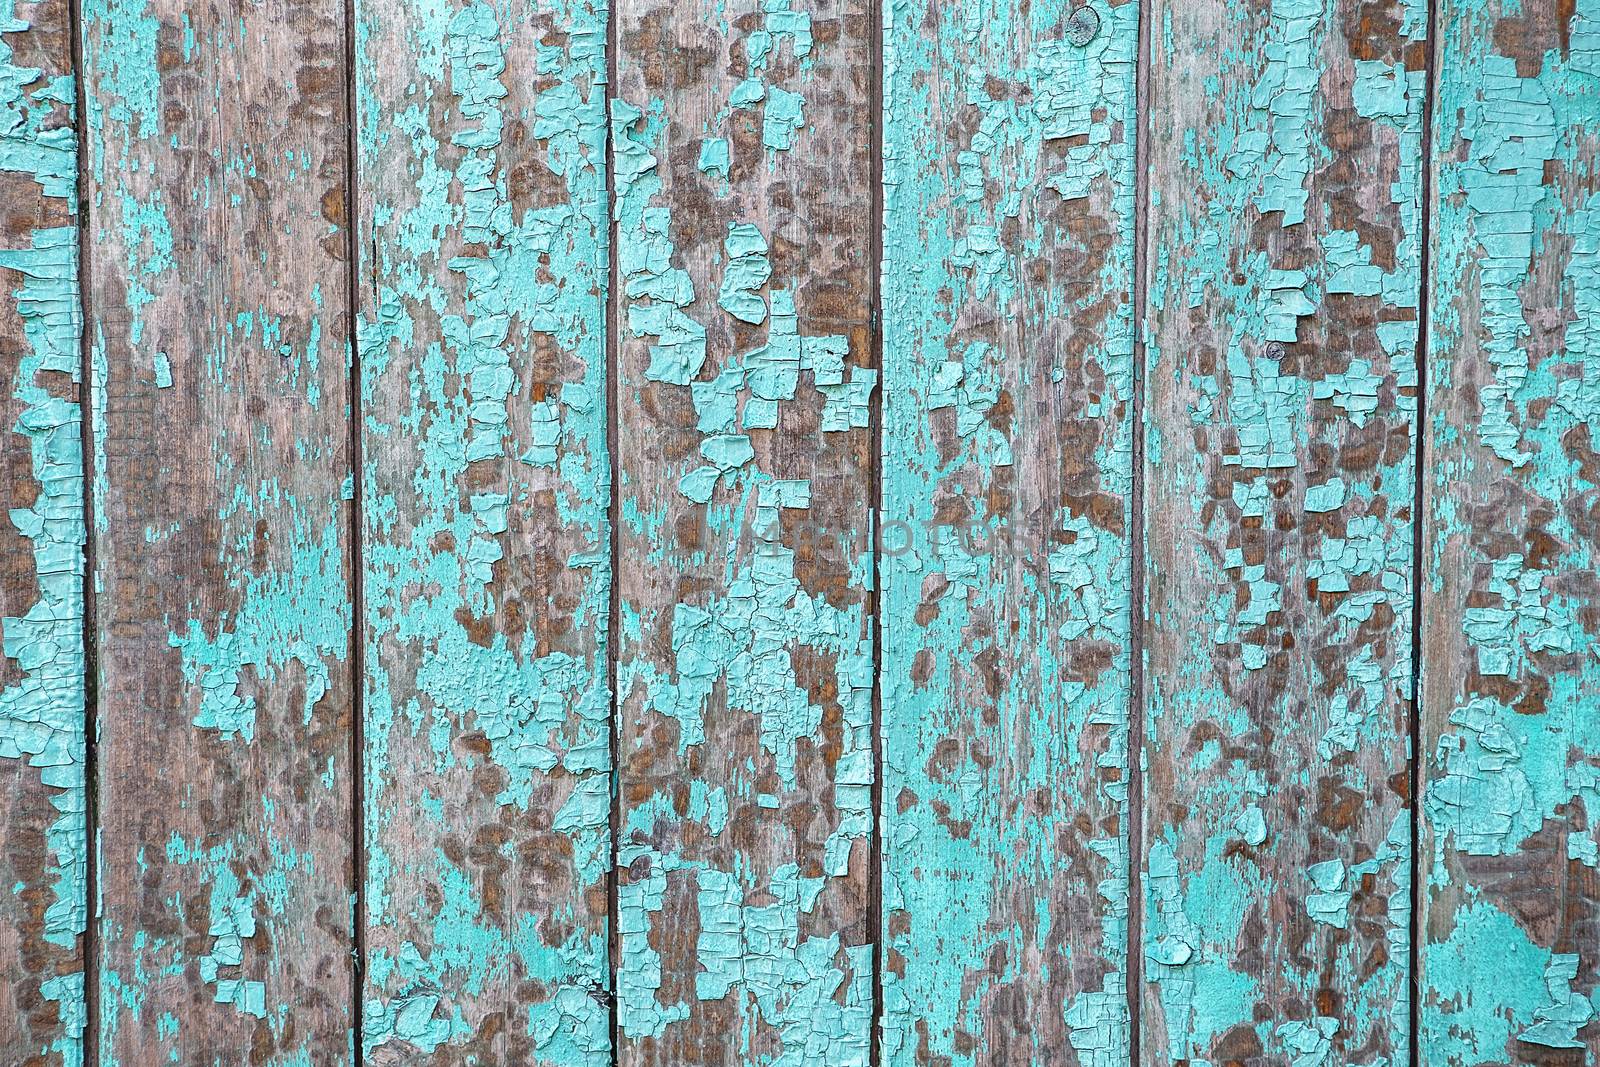 Cracking and peeling blue paint on a wall. Vintage wood background with peeling paint. Old board with Irradiated paint